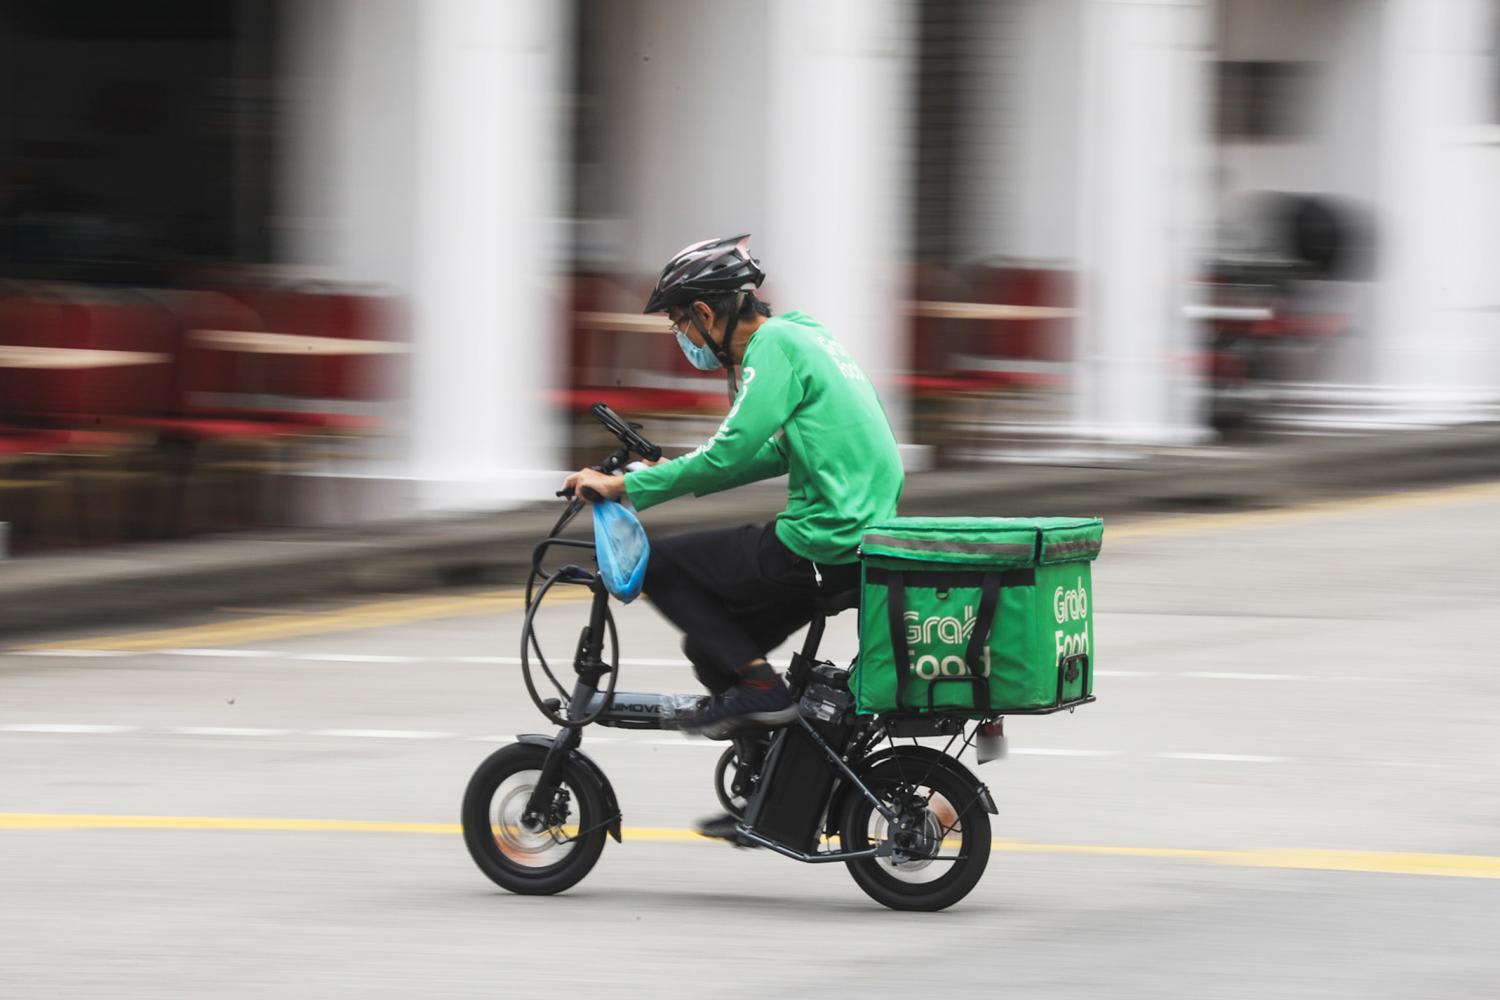 The safety of food delivery riders has come under the spotlight recently, after it was revealed in Parliament earlier this month that five food delivery riders died on the job in the past 18 months.